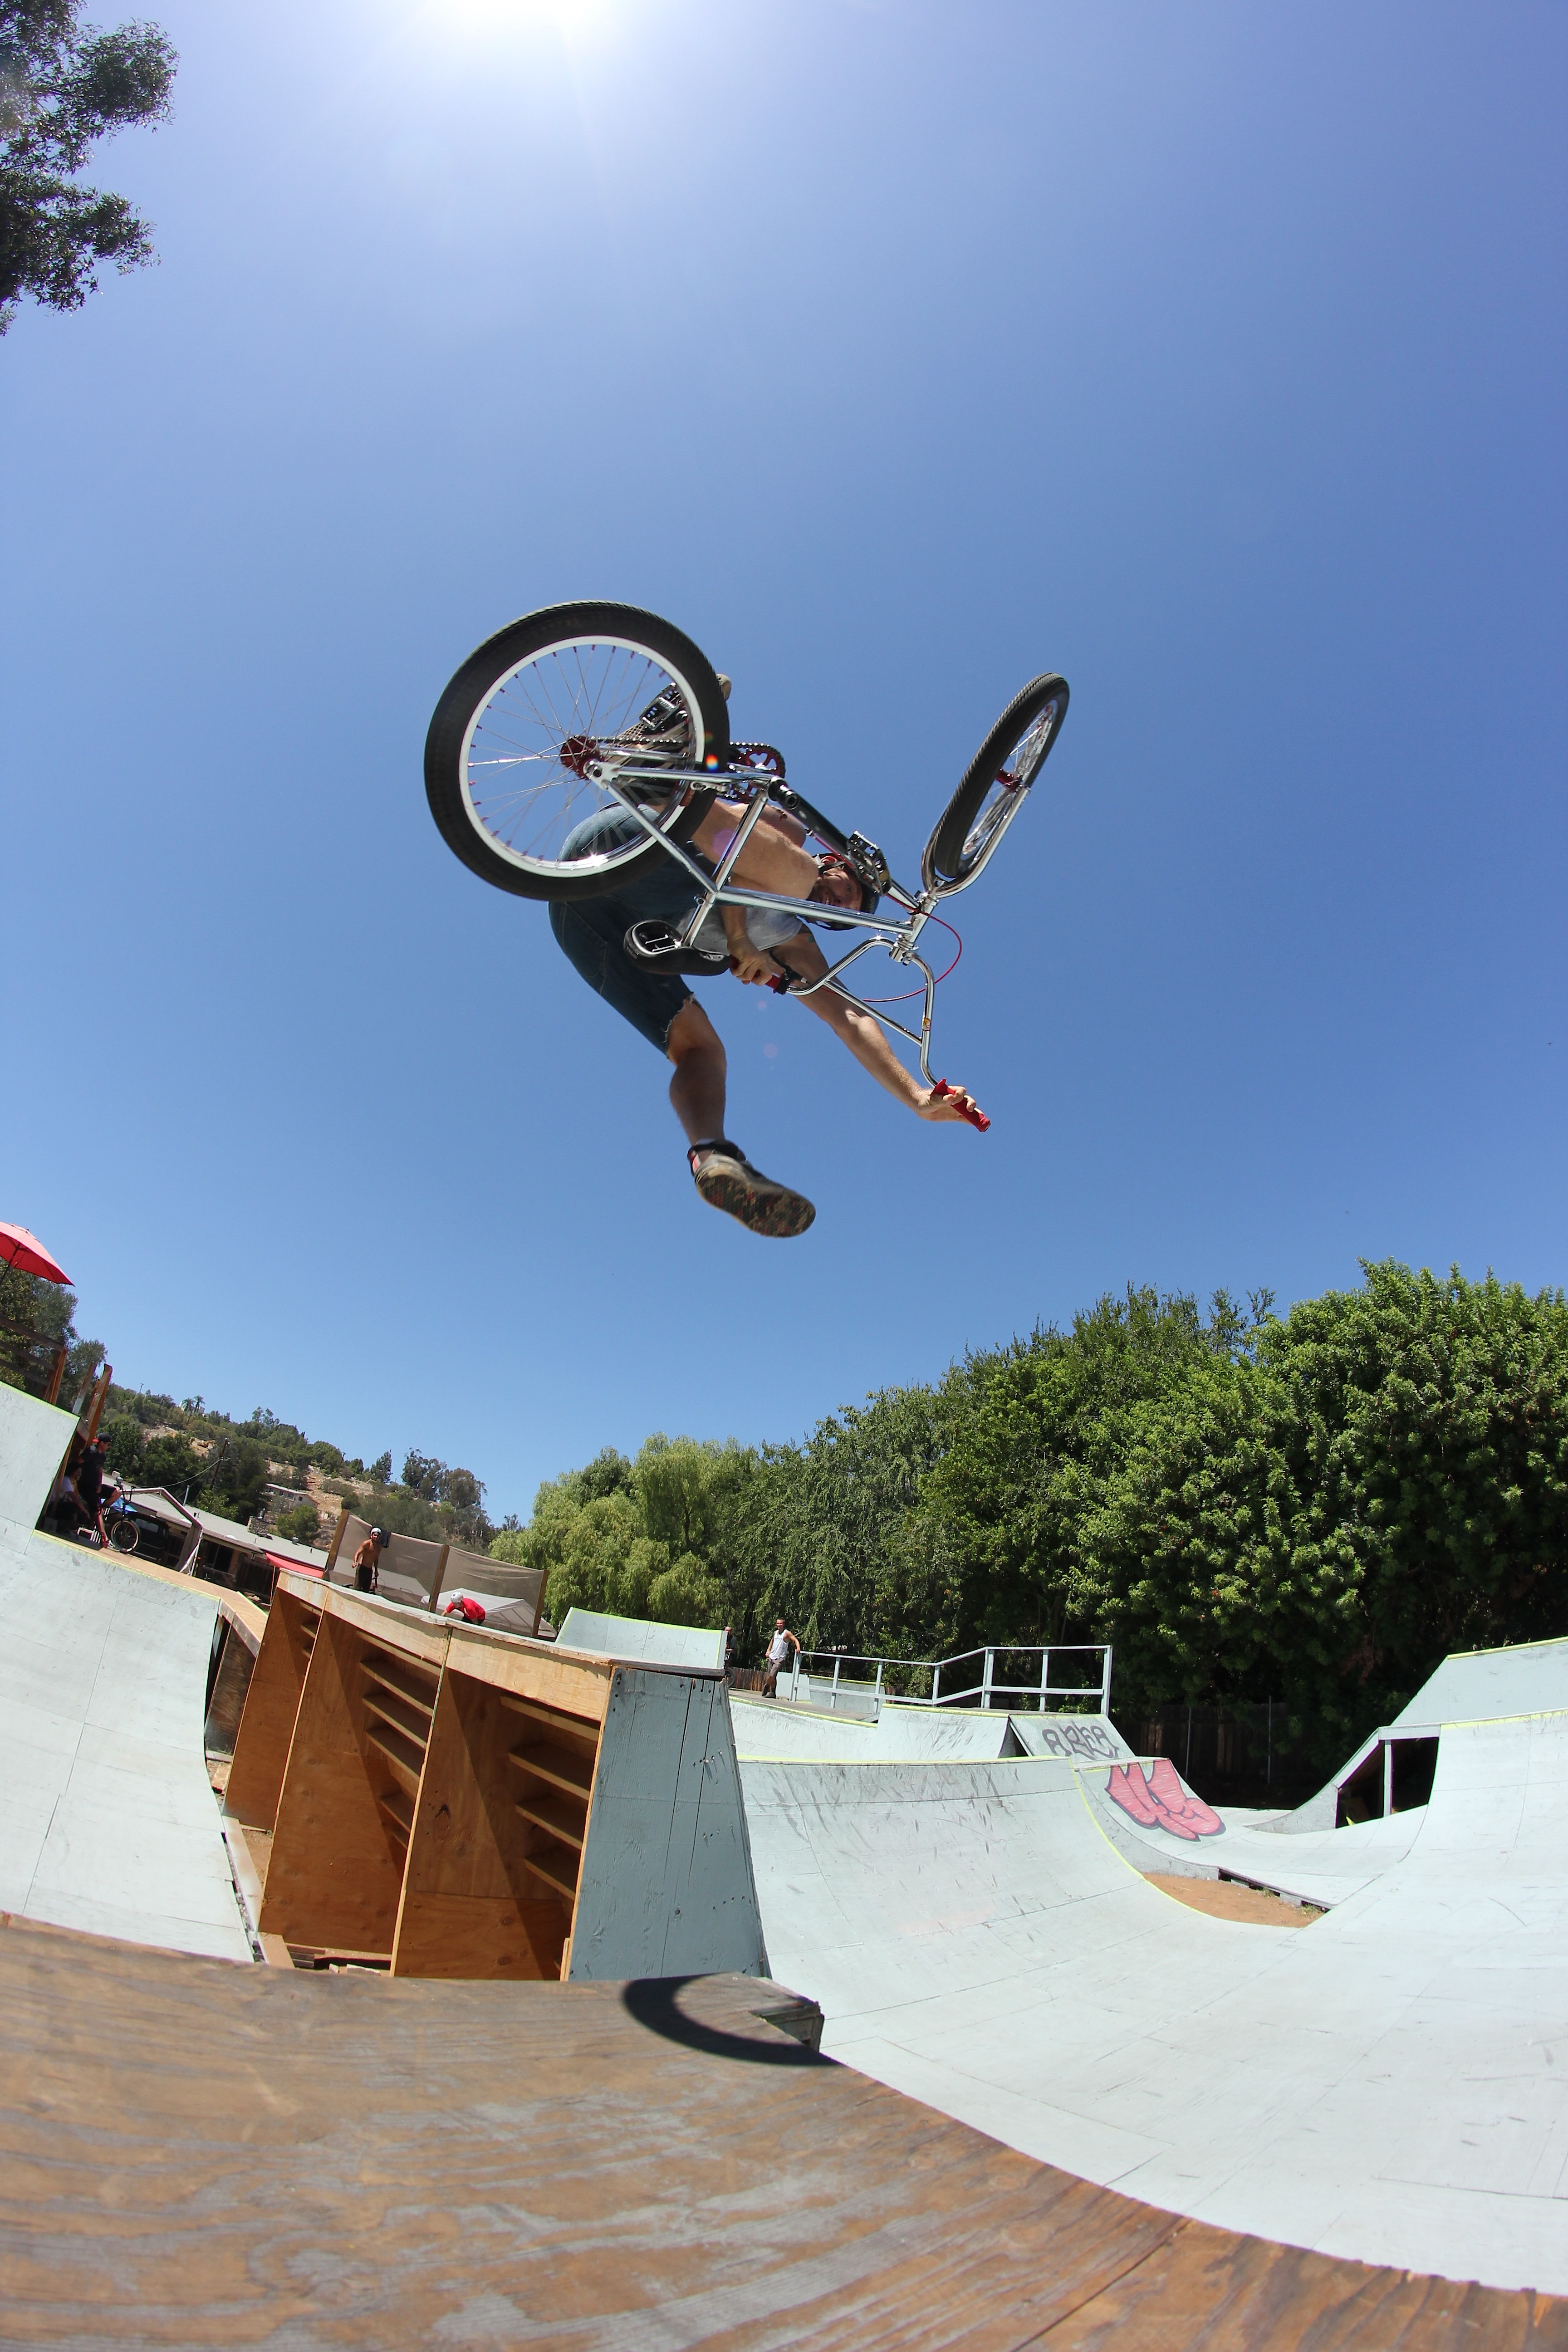 Adam Watkins: Perfect One-footed invert over the hip.